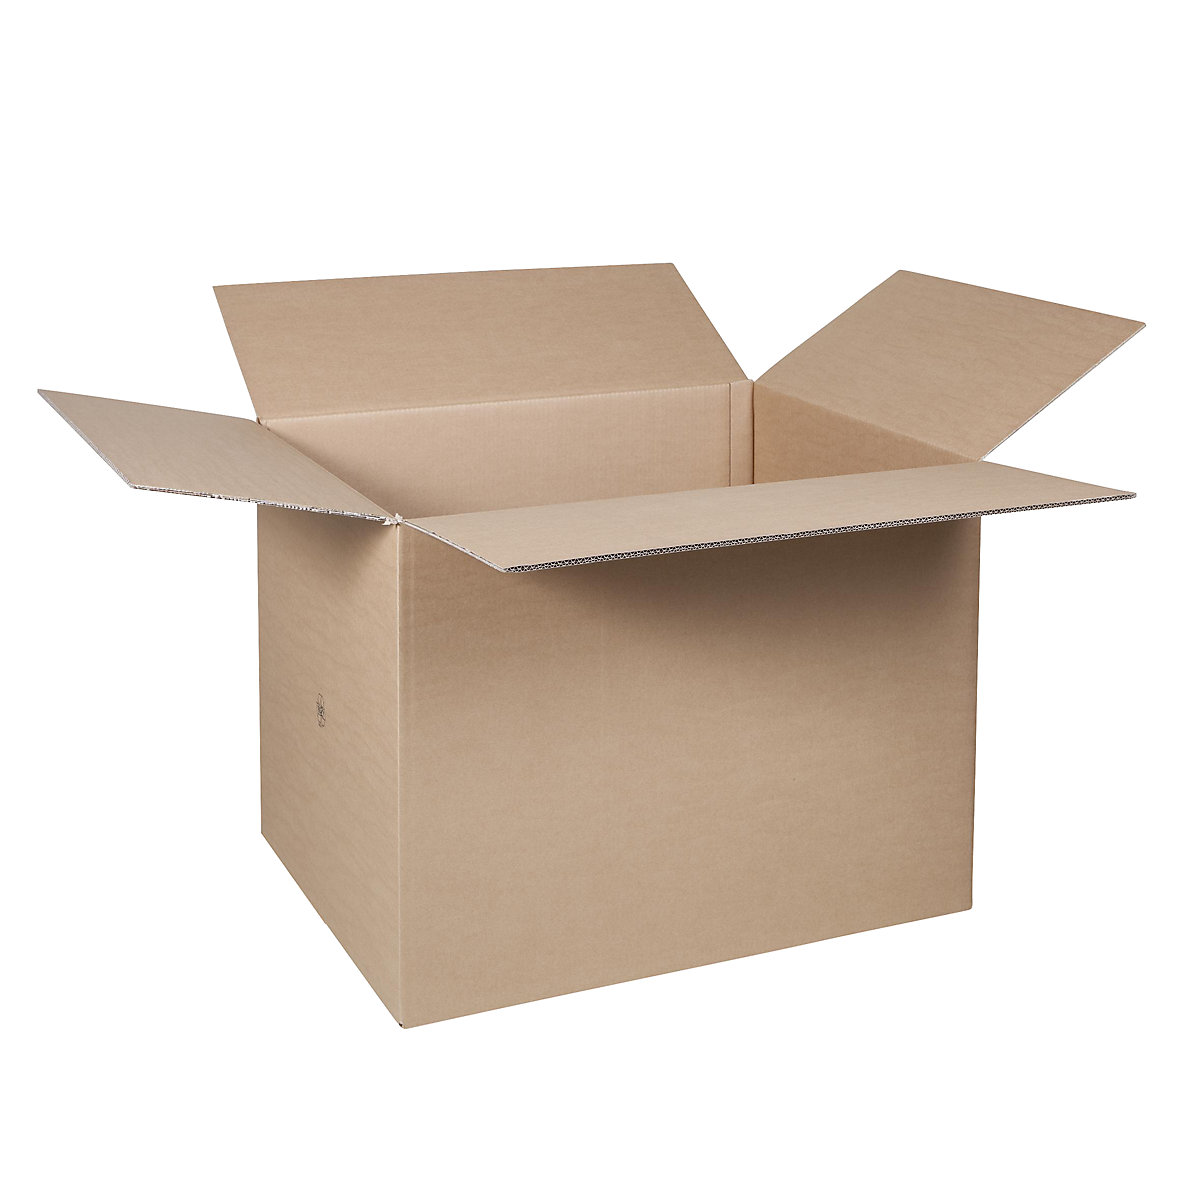 Folding cardboard box, FEFCO 0201, made of double fluted cardboard, internal dimensions 600 x 400 x 400 mm, pack of 50-17